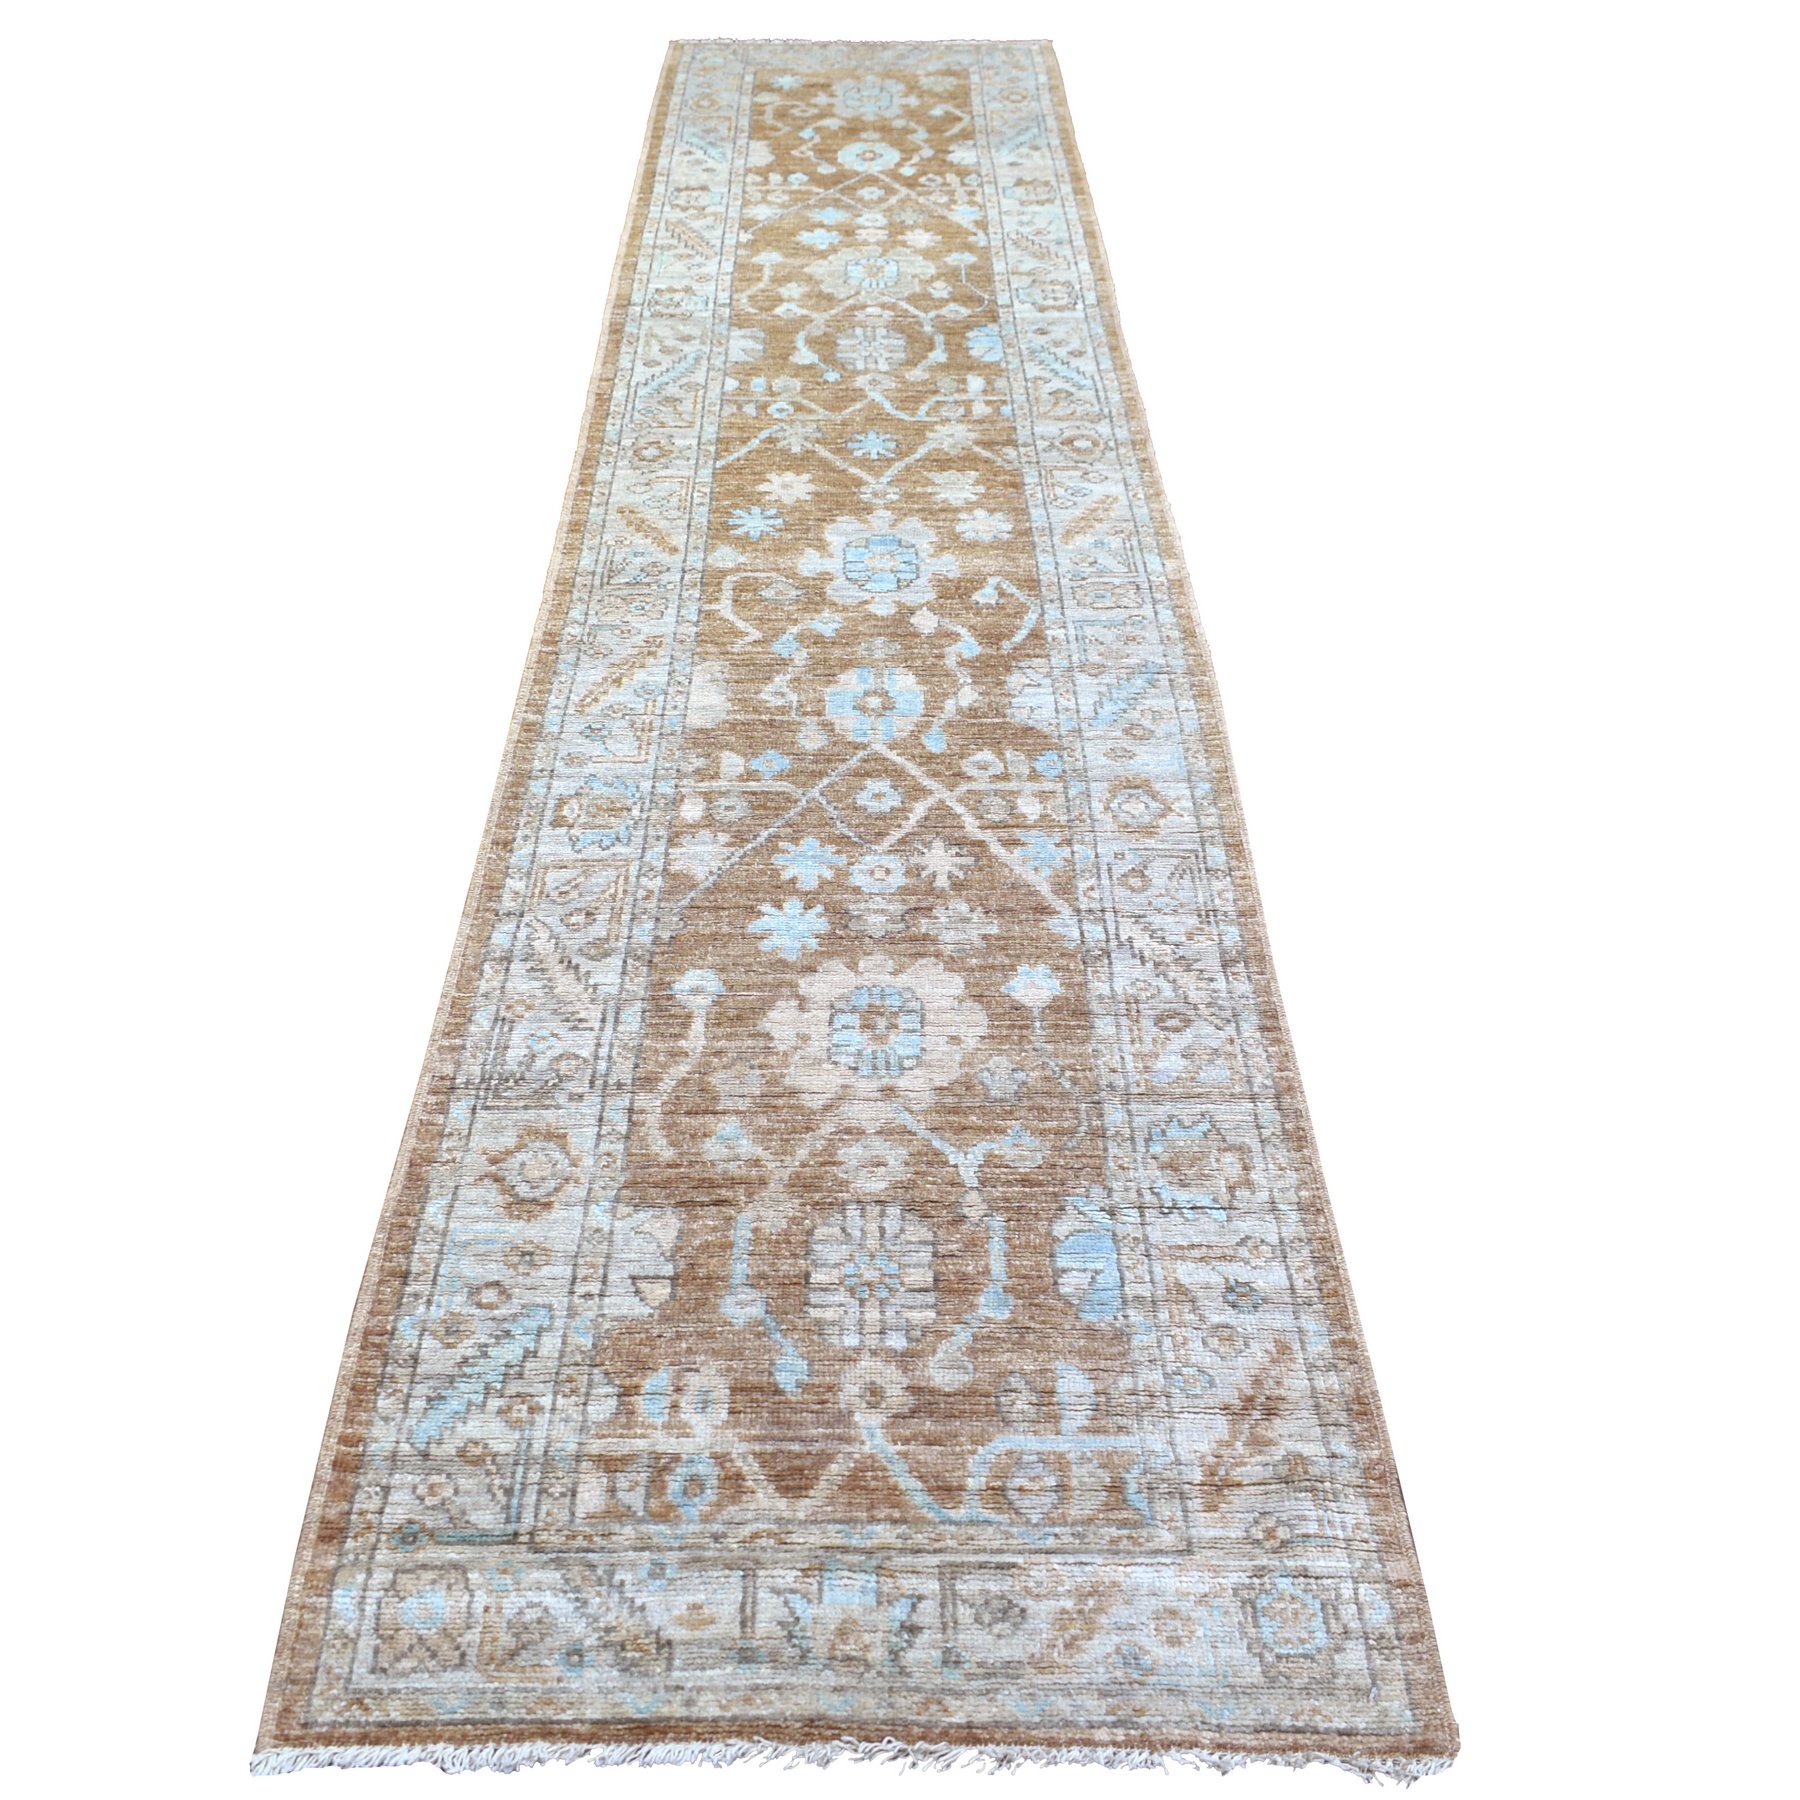 2'10"x13'7" Almond Brown Natural Dyes Angora Oushak All Over Design, Afghan Wool Hand Woven Runner Oriental Rug 